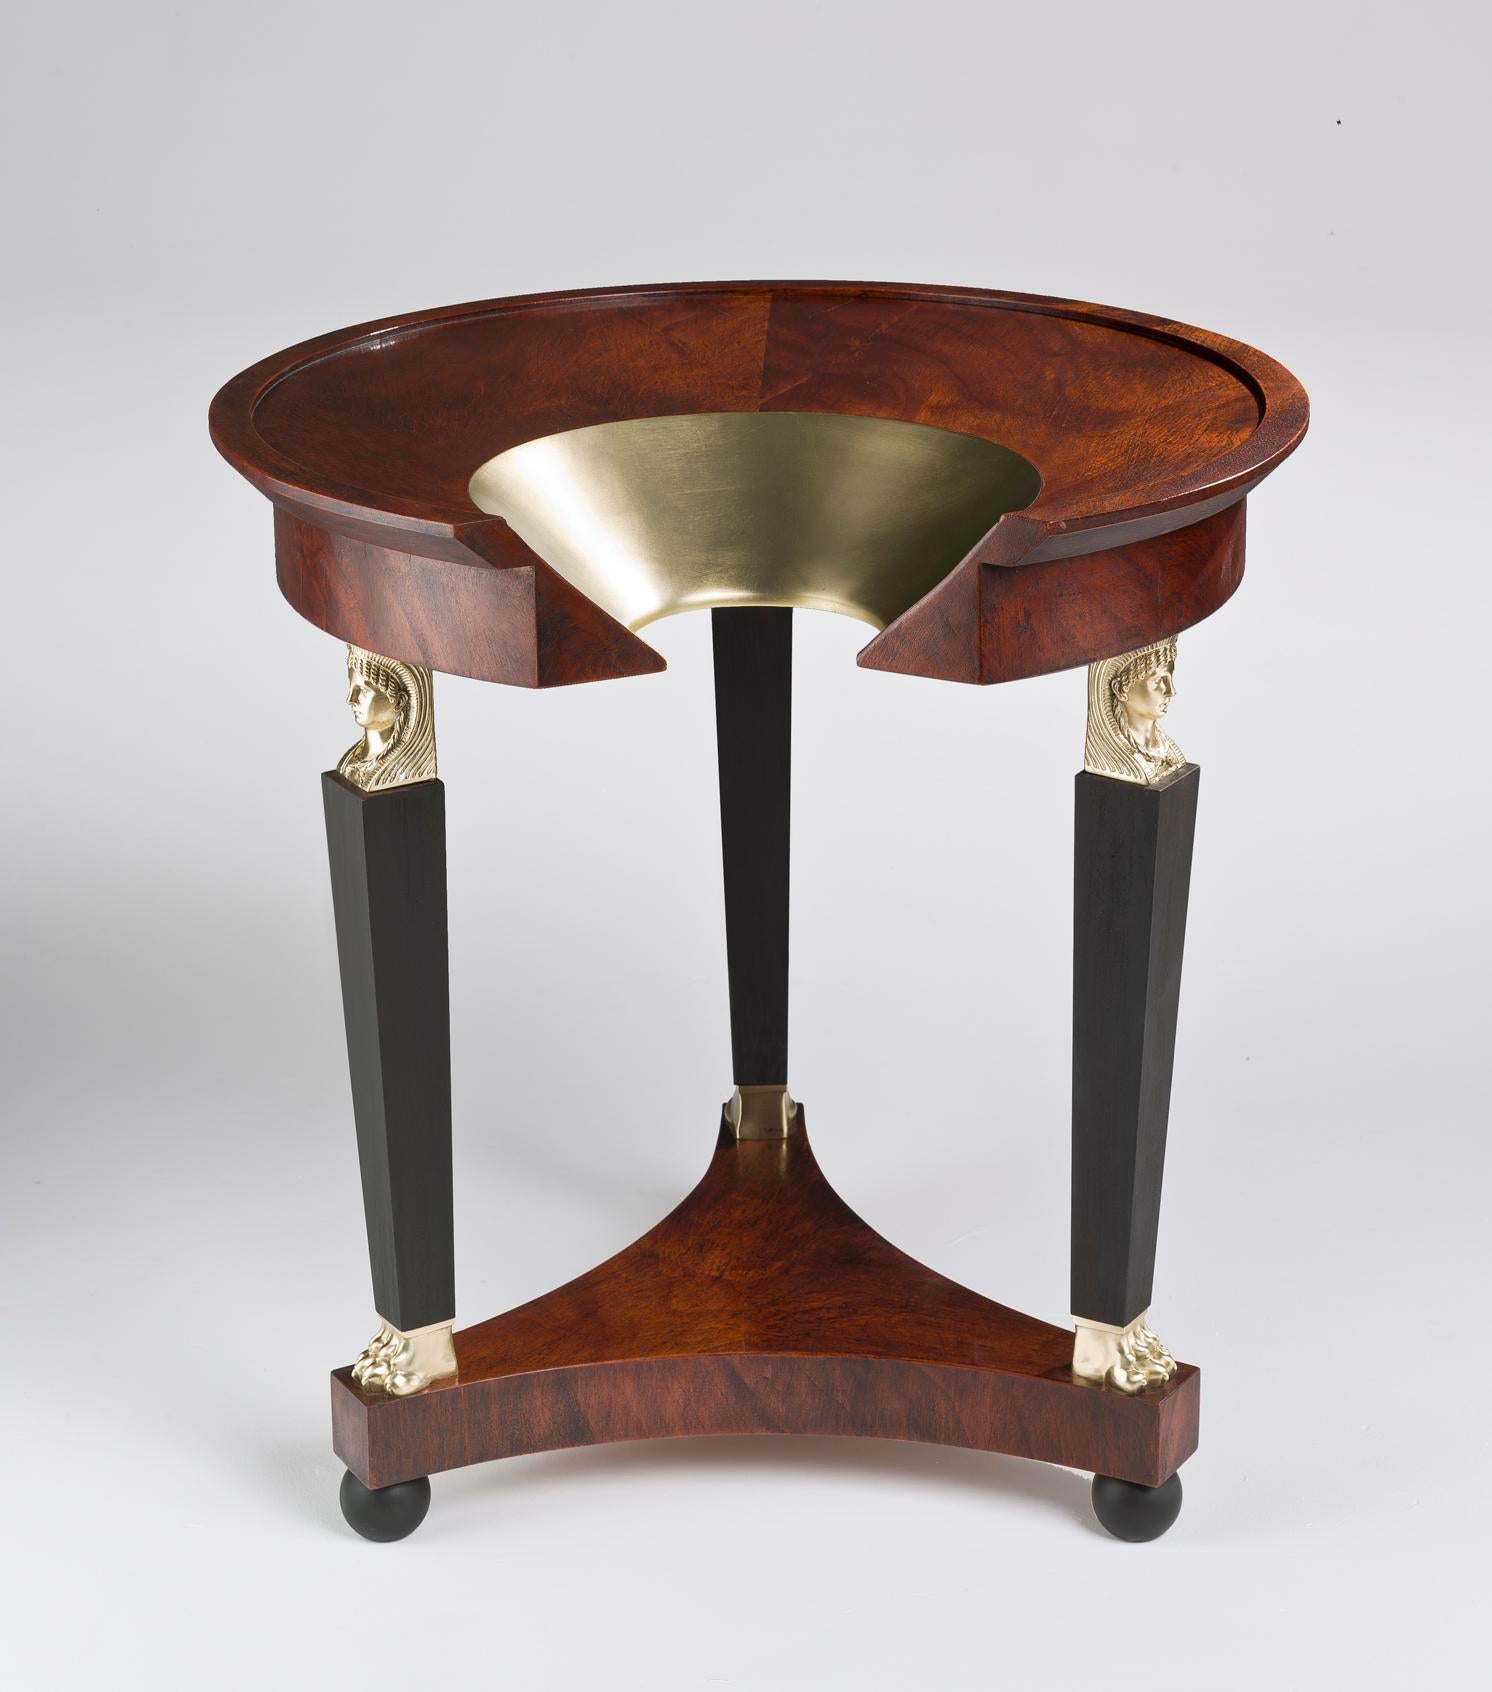 The F* Hole Gueridon side table by Ferruccio Laviani is covered by dark feather Mahogany. 
To its classic taste and proportions, decorative details are added, golden designs and carved columns forming the three legs of the table. 

Gracefulness and